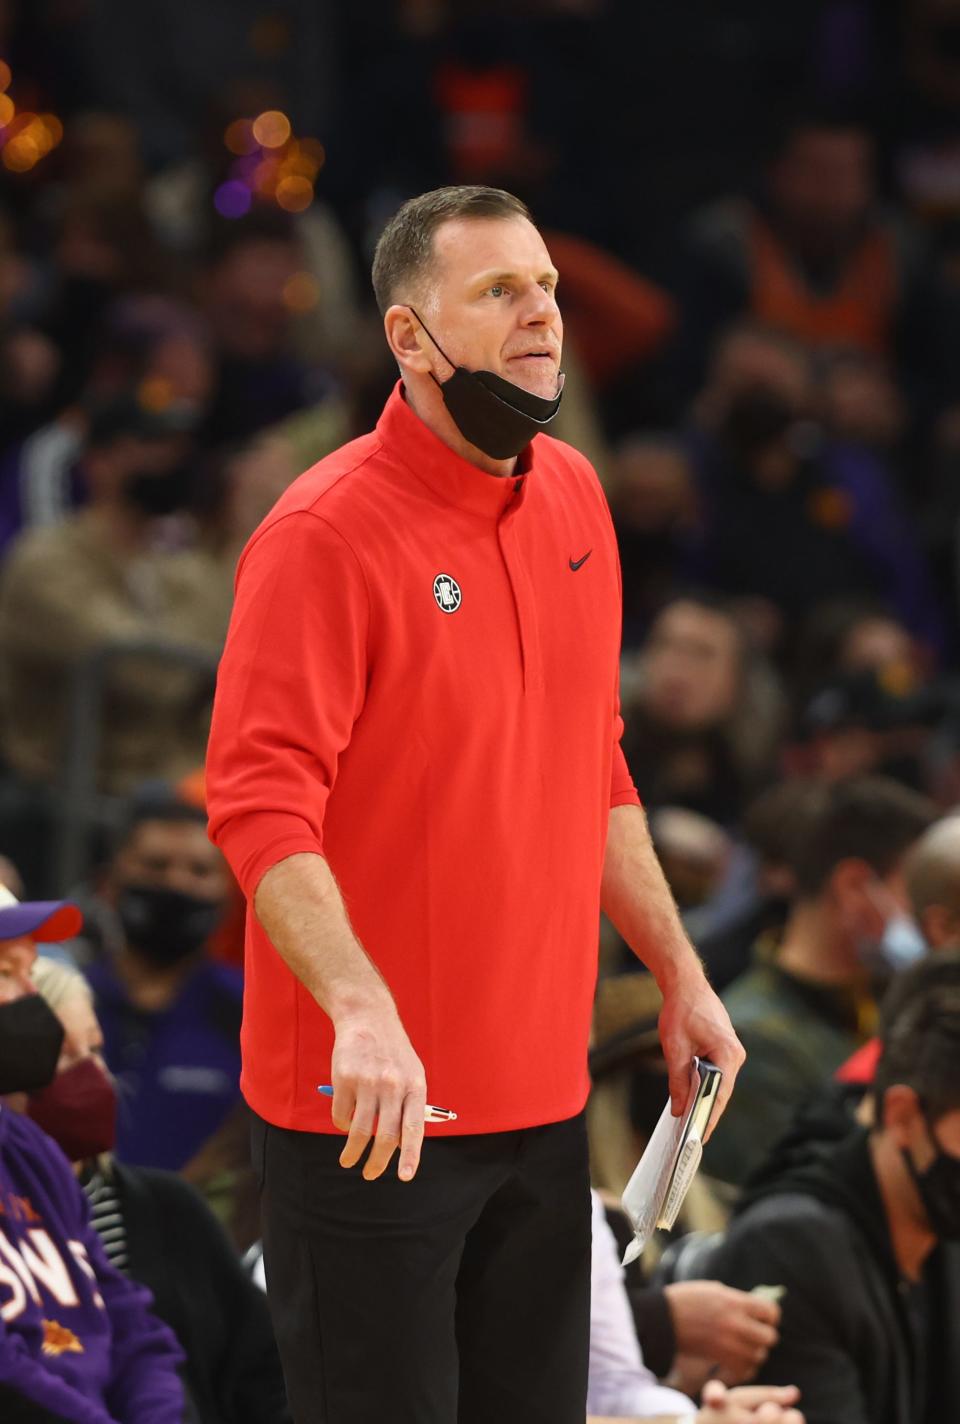 Los Angeles Clippers assistant coach Jay Larranaga will head to the NCAA men's basketball championship game if Miami beats Connecticut on Saturday.